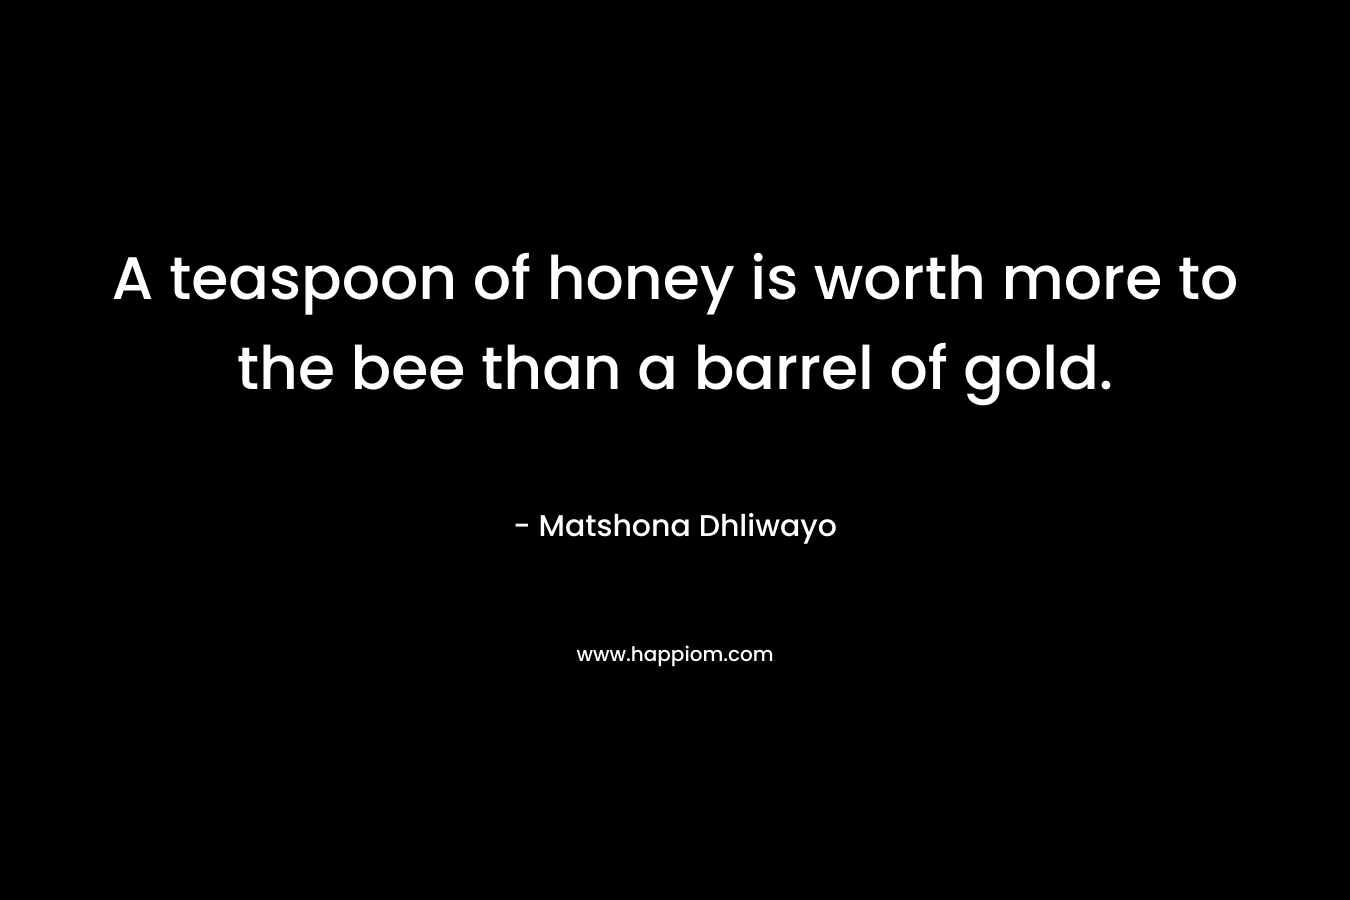 A teaspoon of honey is worth more to the bee than a barrel of gold. – Matshona Dhliwayo